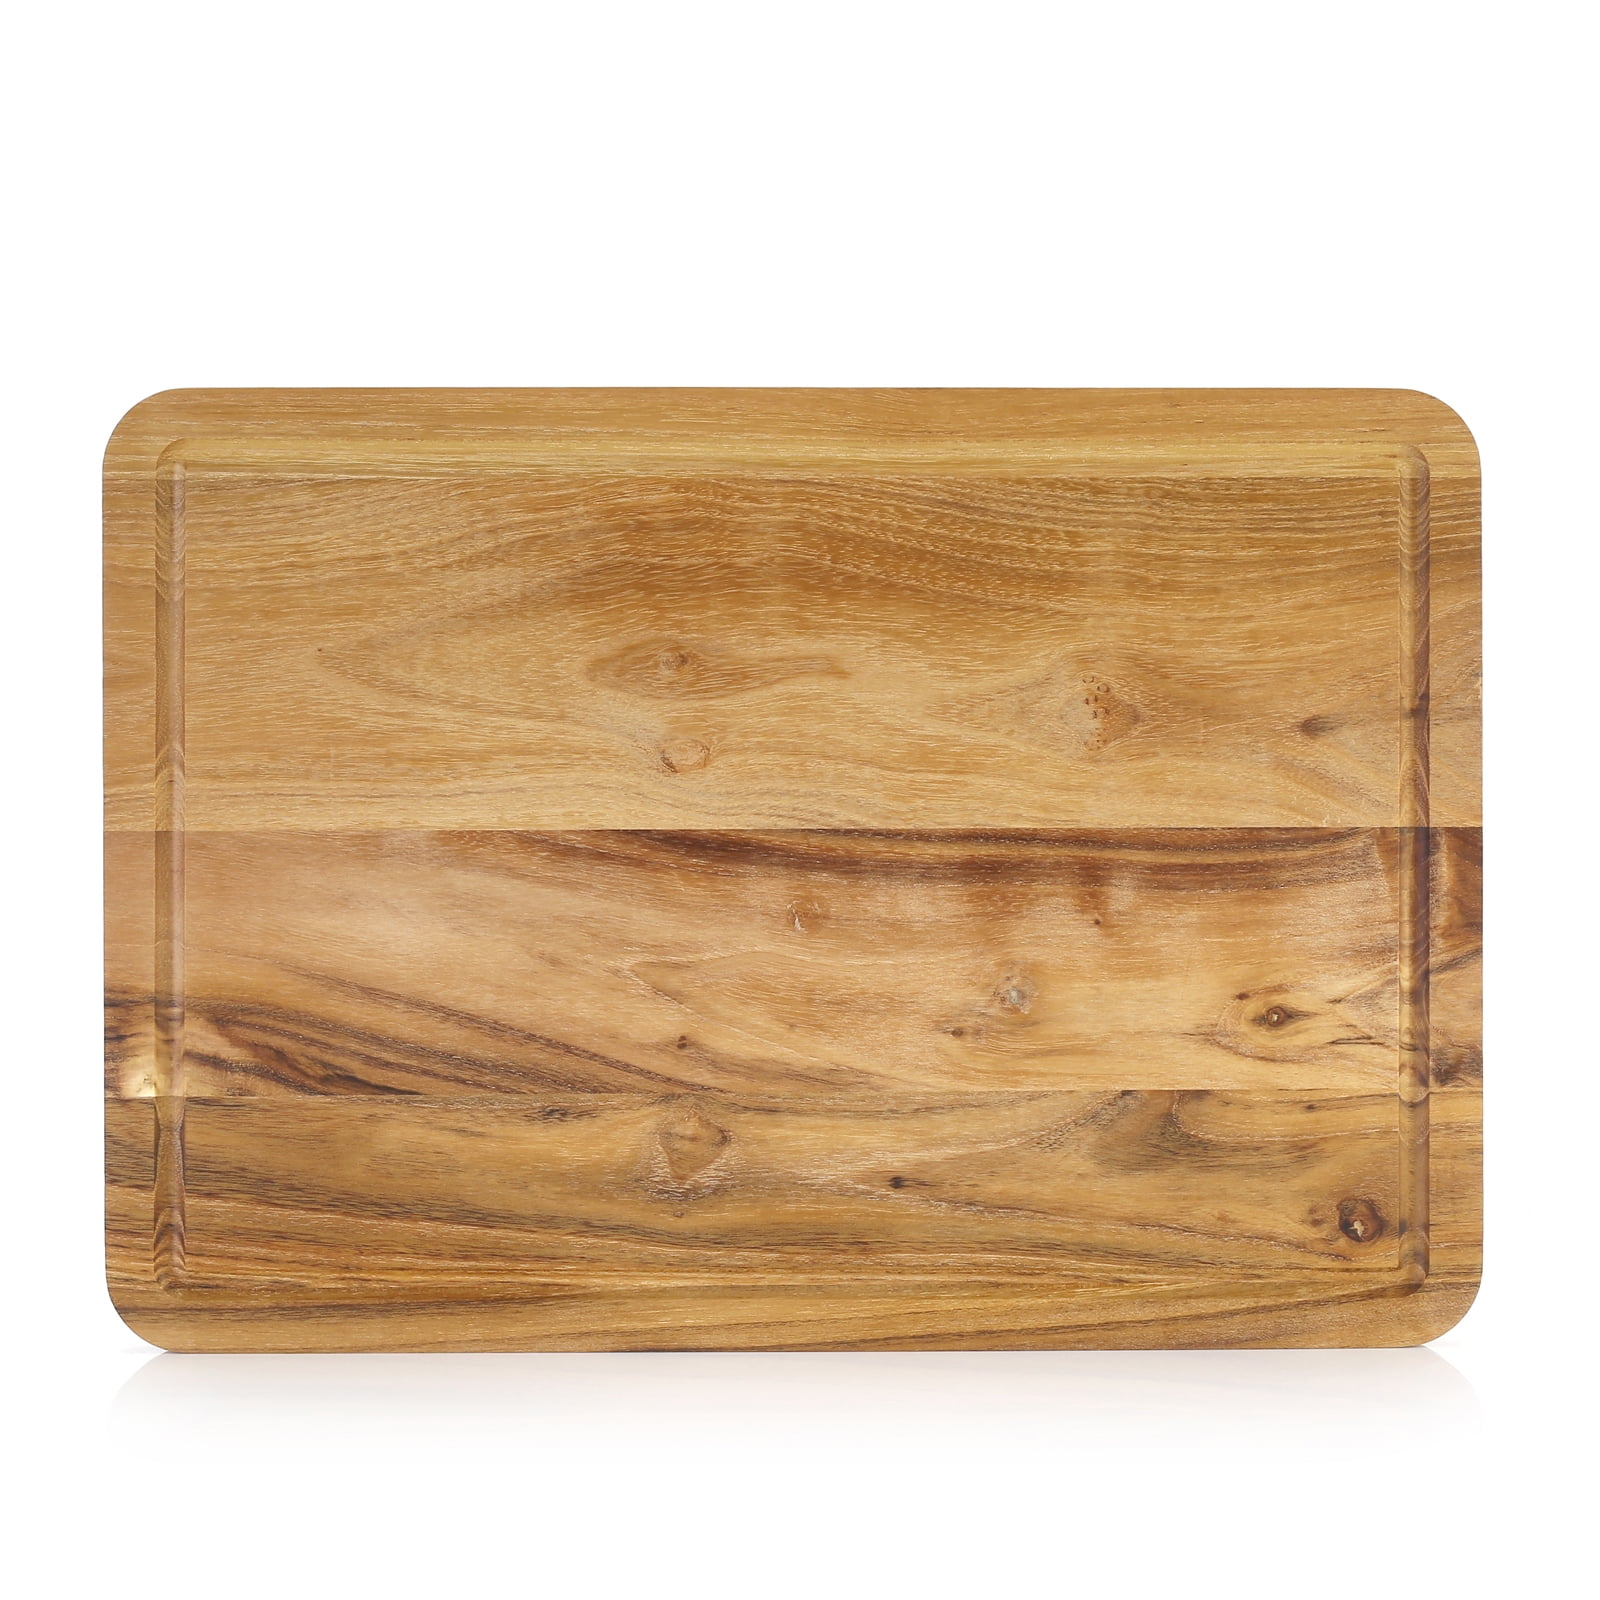 Strong and Durable Premium Organic Bamboo  Cutting Board with Drip Groove-Thick 14.5 x 11.5 x 0.7 inches